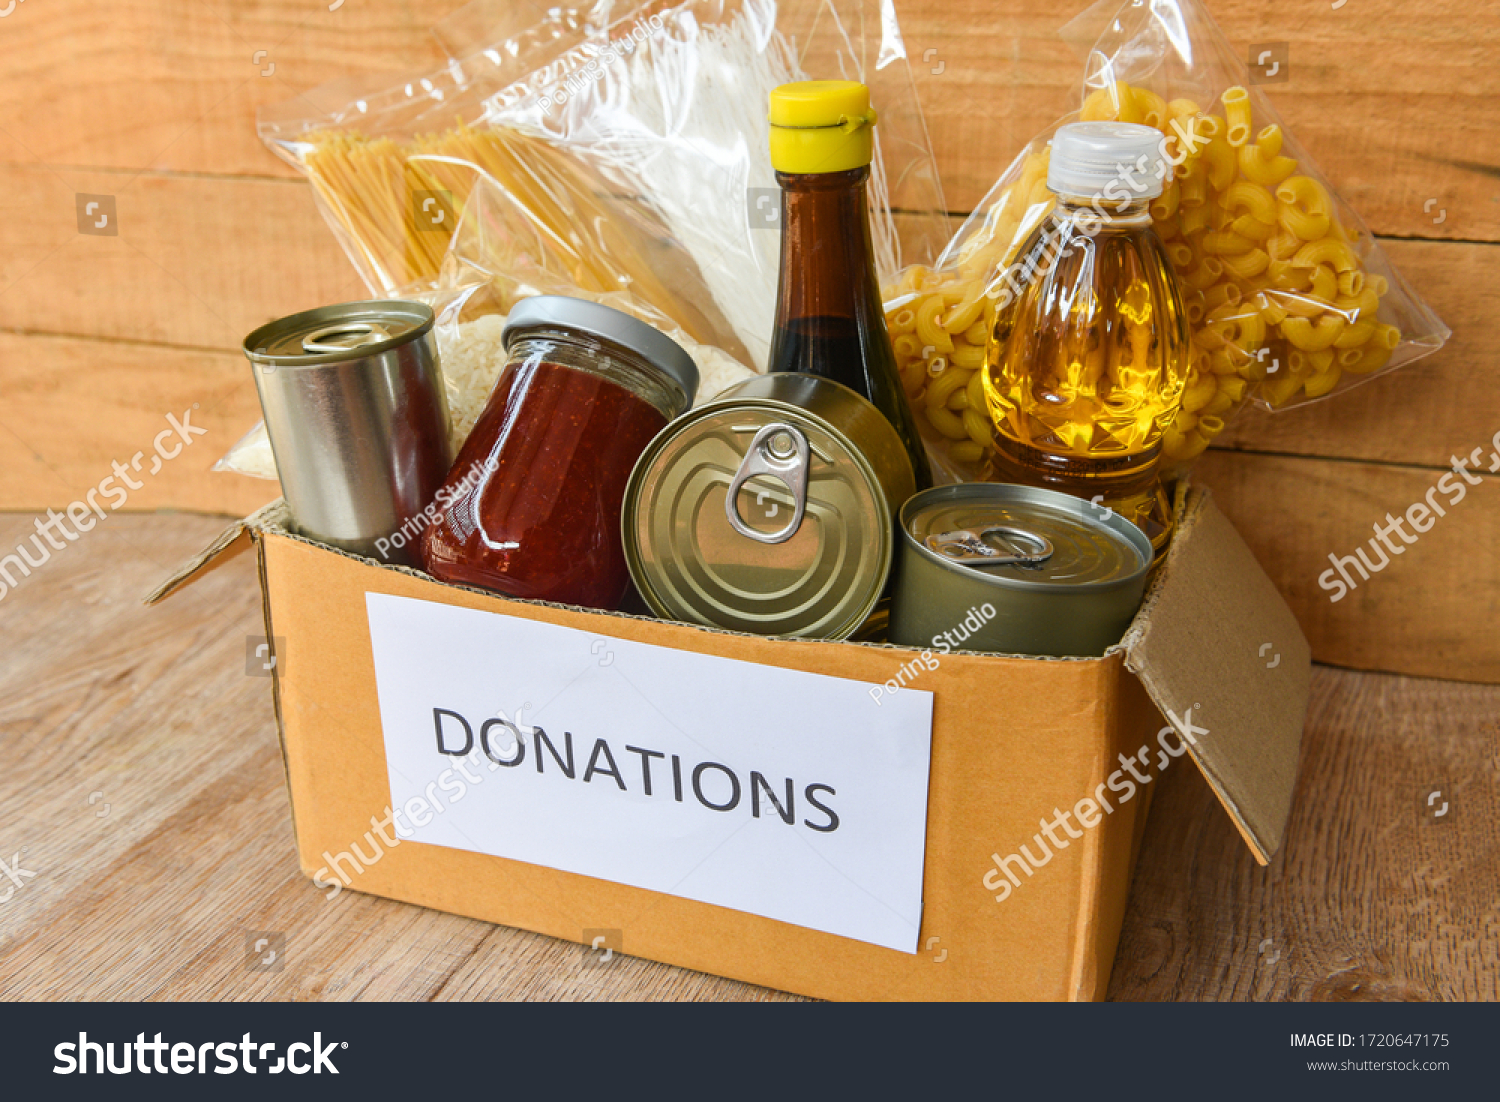 Donations box with canned food on wooden table background / pasta canned goods and dry food non perishable with cooking oil rice noodles spaghetti macaroni donations food concept #1720647175